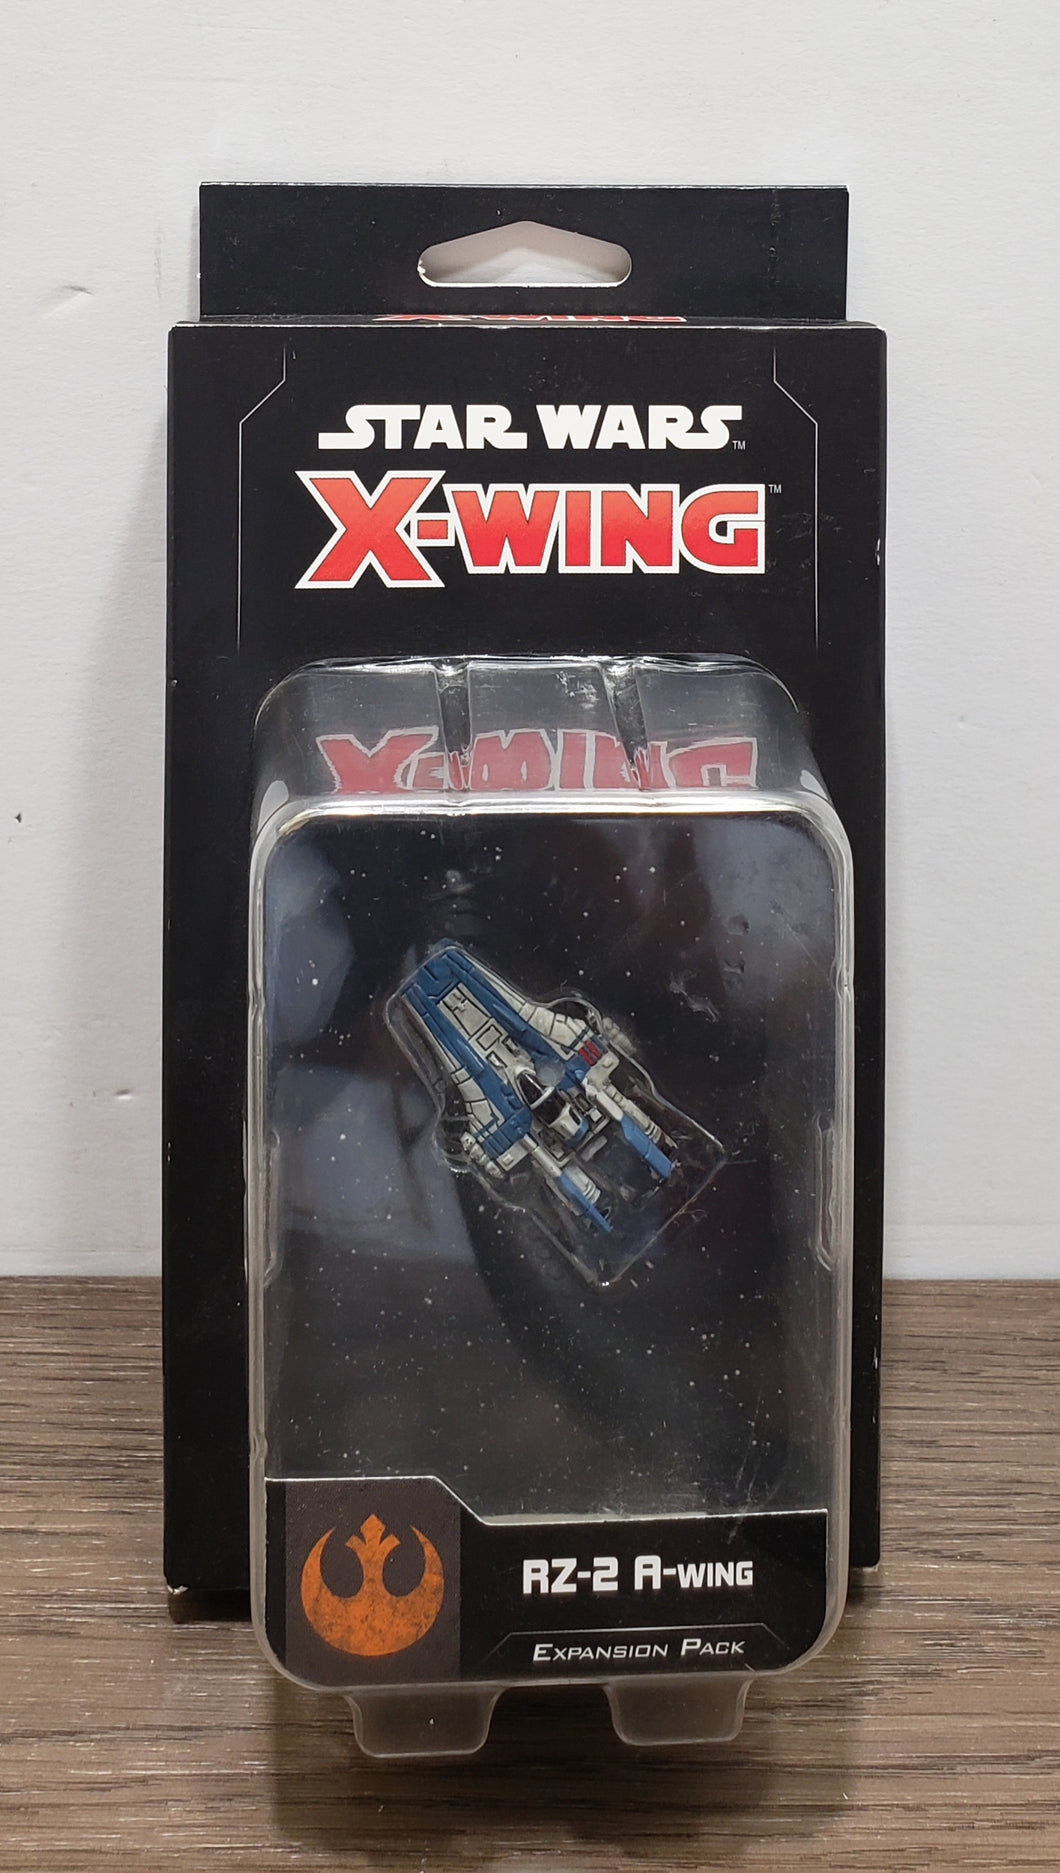 Star Wars X-Wing 2nd Edition Miniatures Game RZ-2 A-Wing Expansion Pack